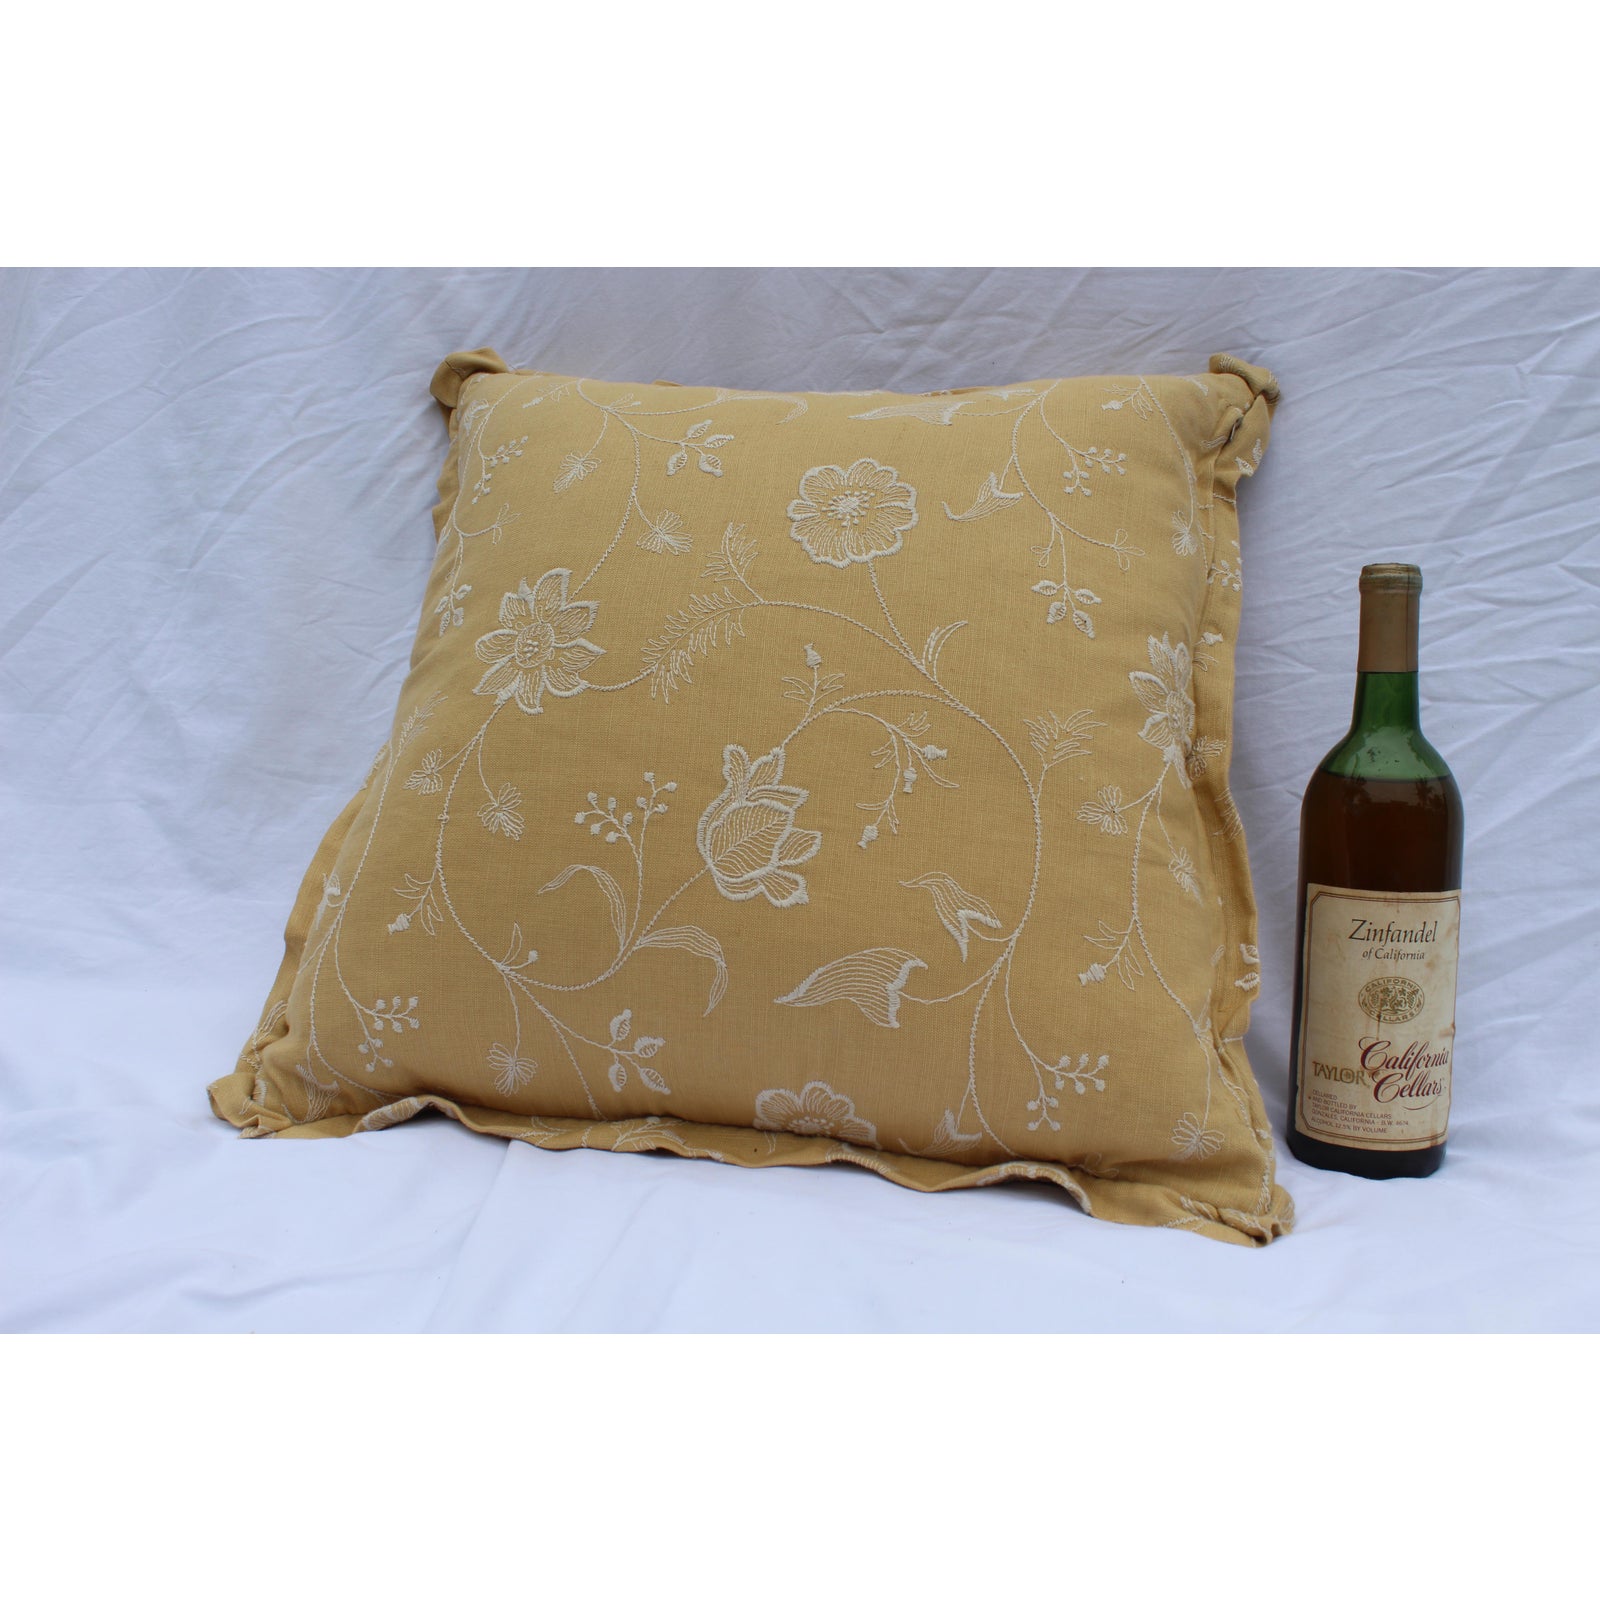 1960s-mid-century-modern-mustard-yellow-down-pillow-with-white-floral-embroidery-6210